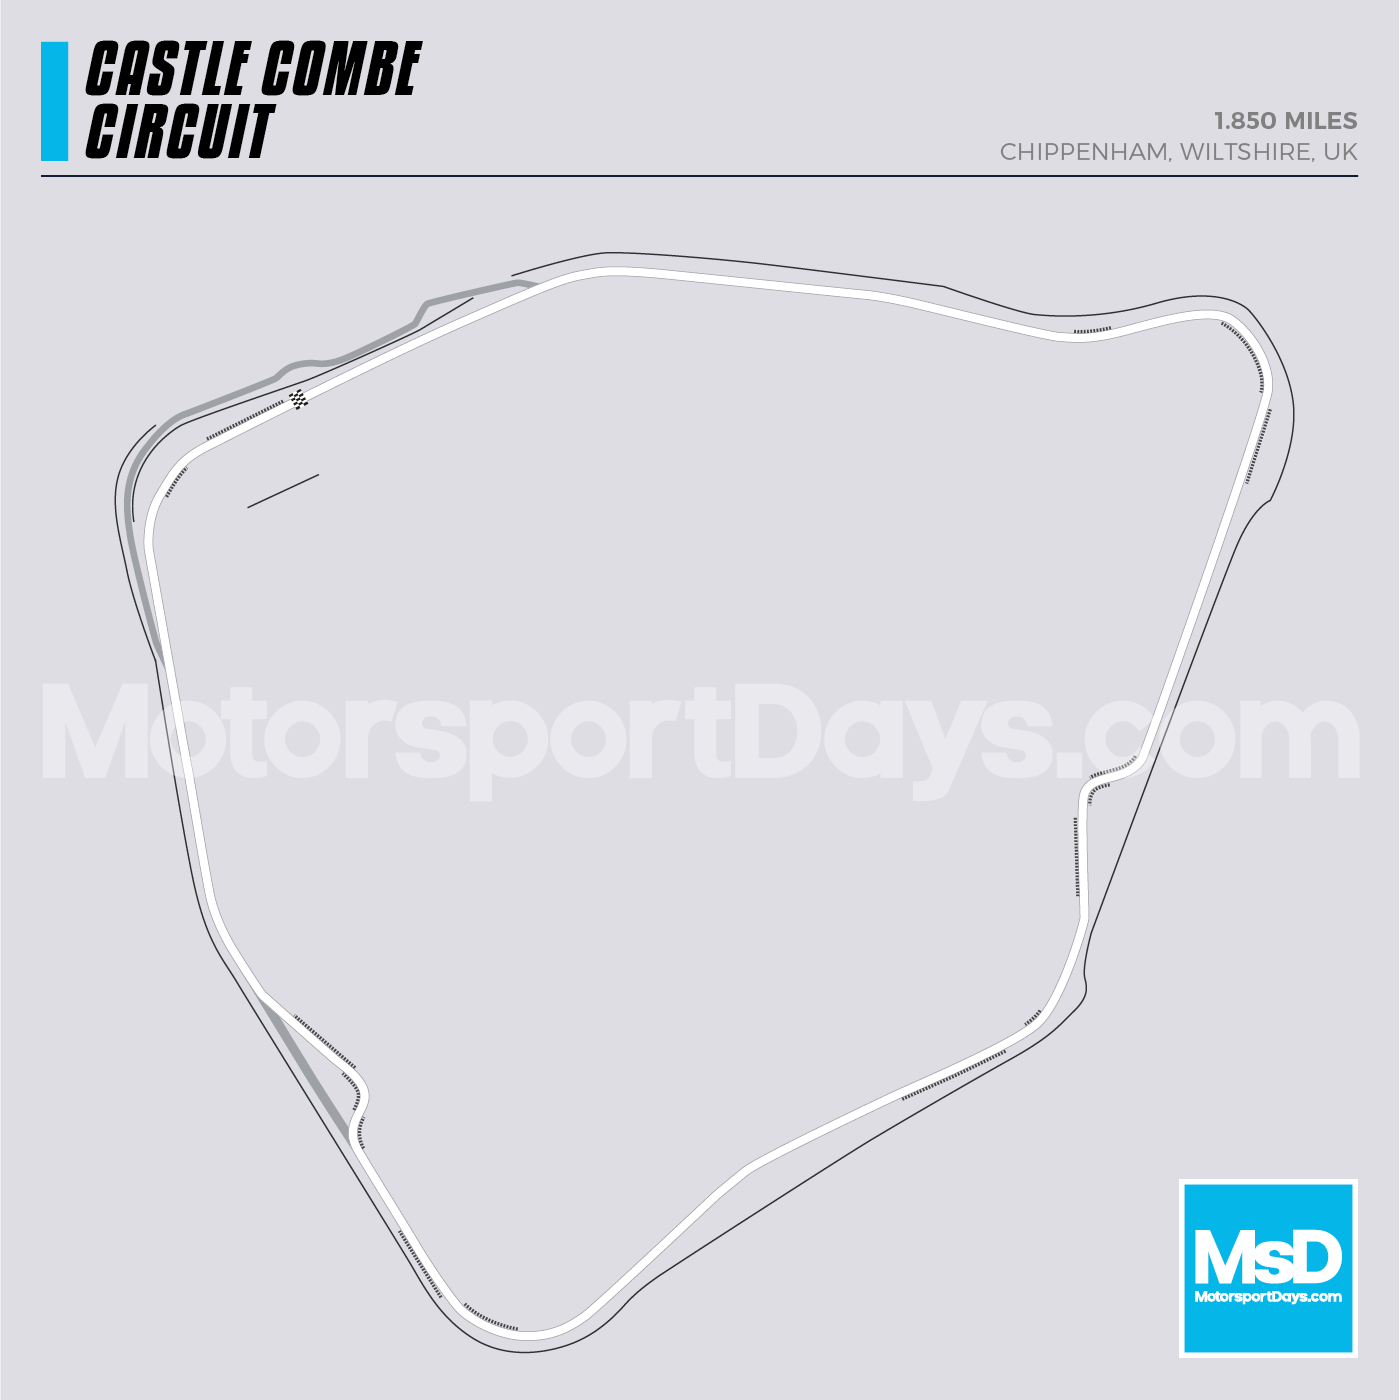 Castle-Combe-Circuit-track-map